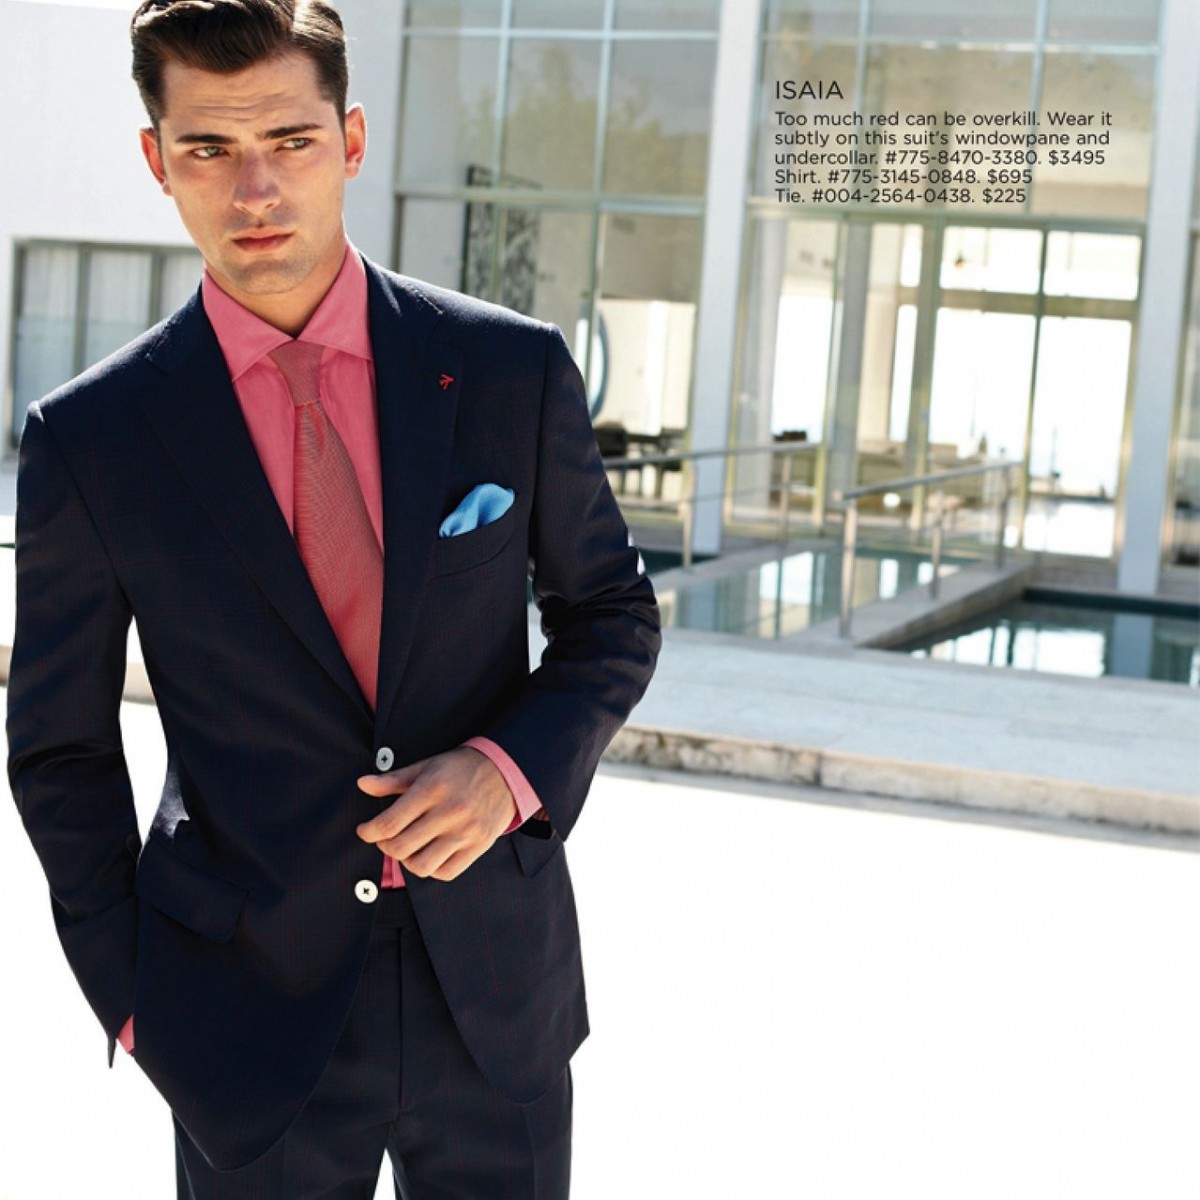 Sean OPry photo 240 of 307 pics, wallpaper - photo #623097 - ThePlace2